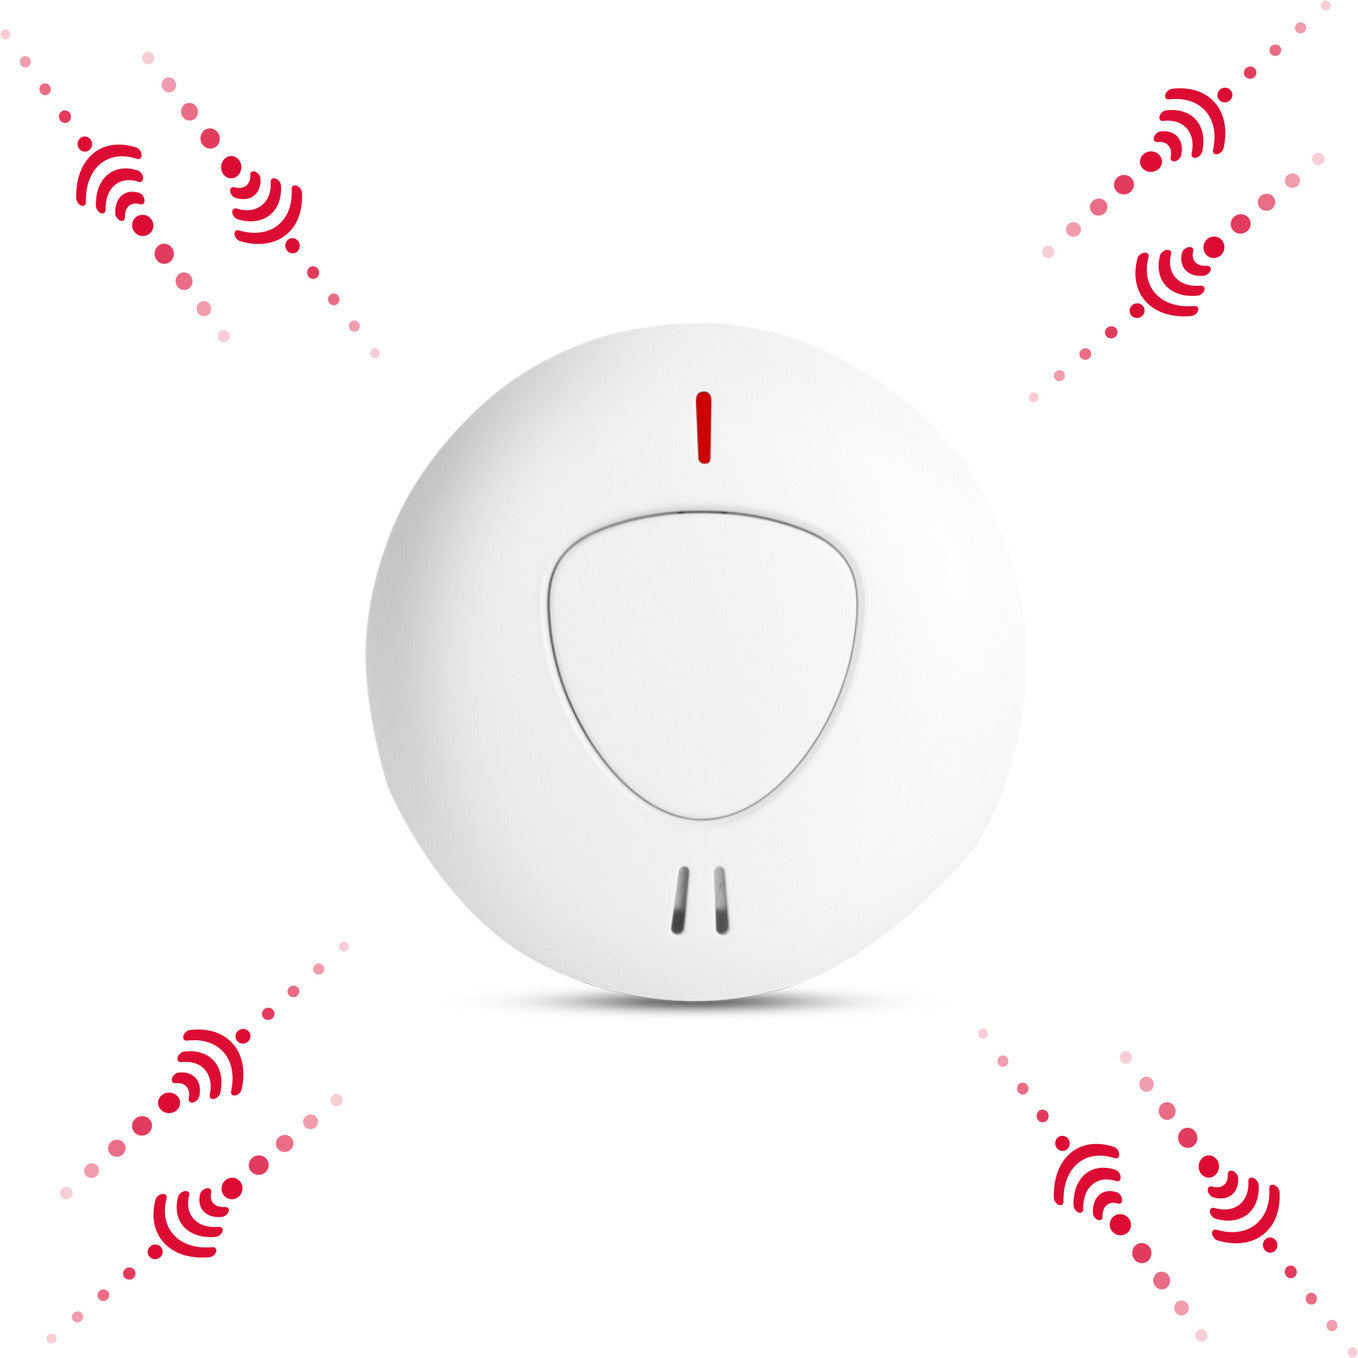 Firexo 4 Unit Interlinked Optical Smoke Alarm and Heat Alarm bundle all with 10 Year Tamper Proof Battery, White, Bundle contains 3x Smoke Alarm, 1x Heat Alarm